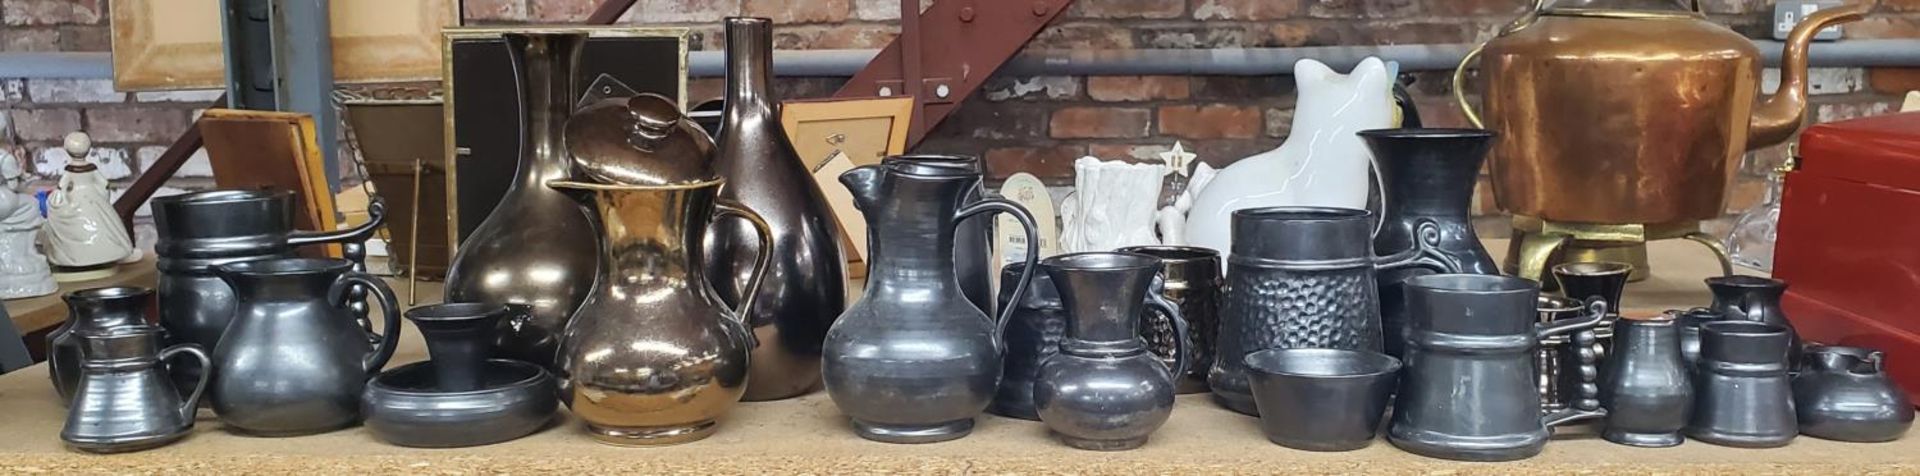 A LARGE QUANTITY OF PRINKNASH POTTERY TO INCLUDE JUGS, TANKARDS, VASES, POTS, ETC